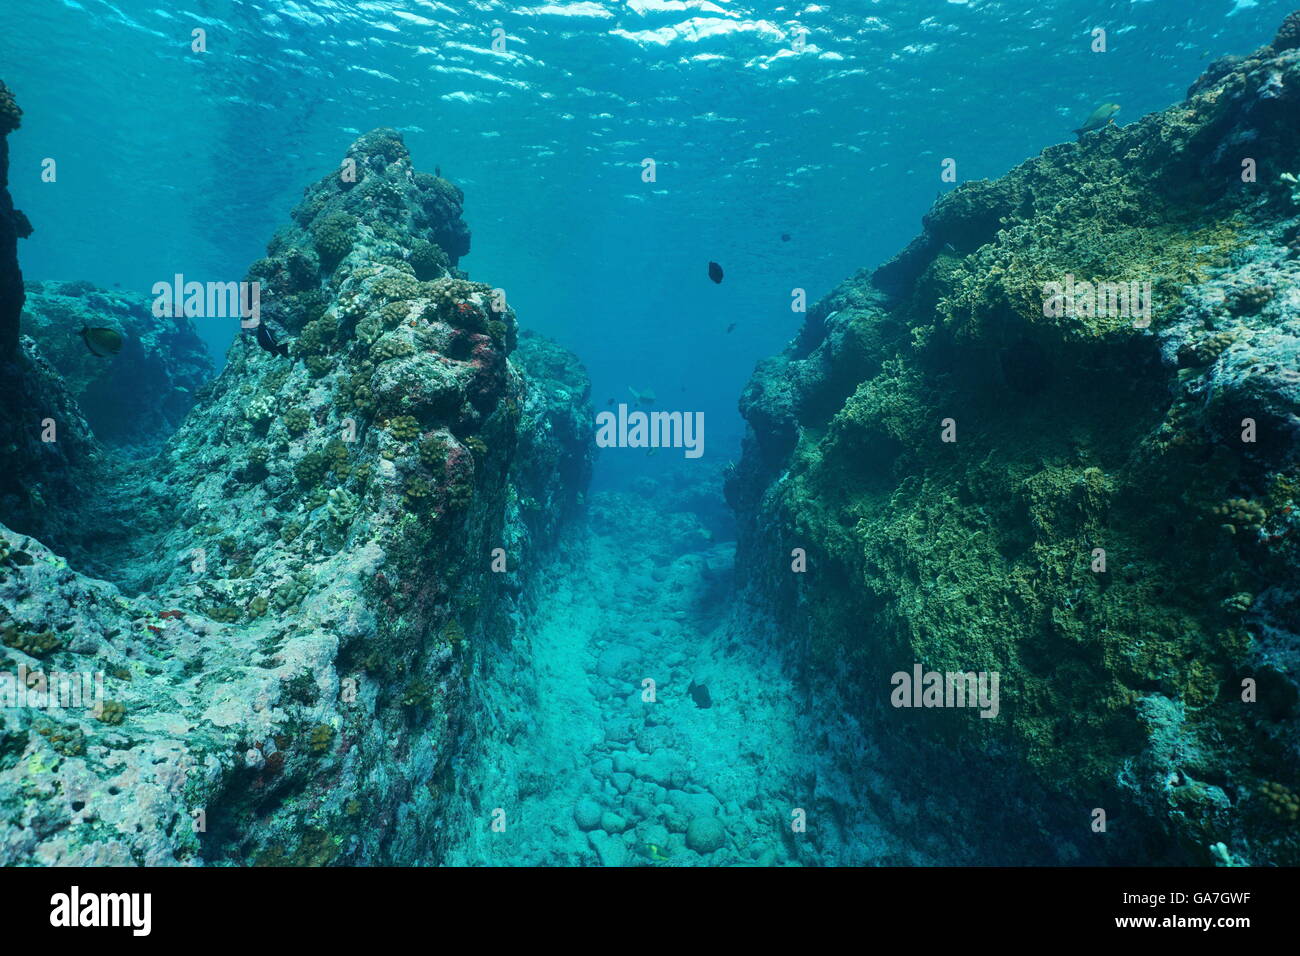 Underwater landscape on the outer reef carved by the swell, Huahine island, Pacific ocean, French Polynesia Stock Photo